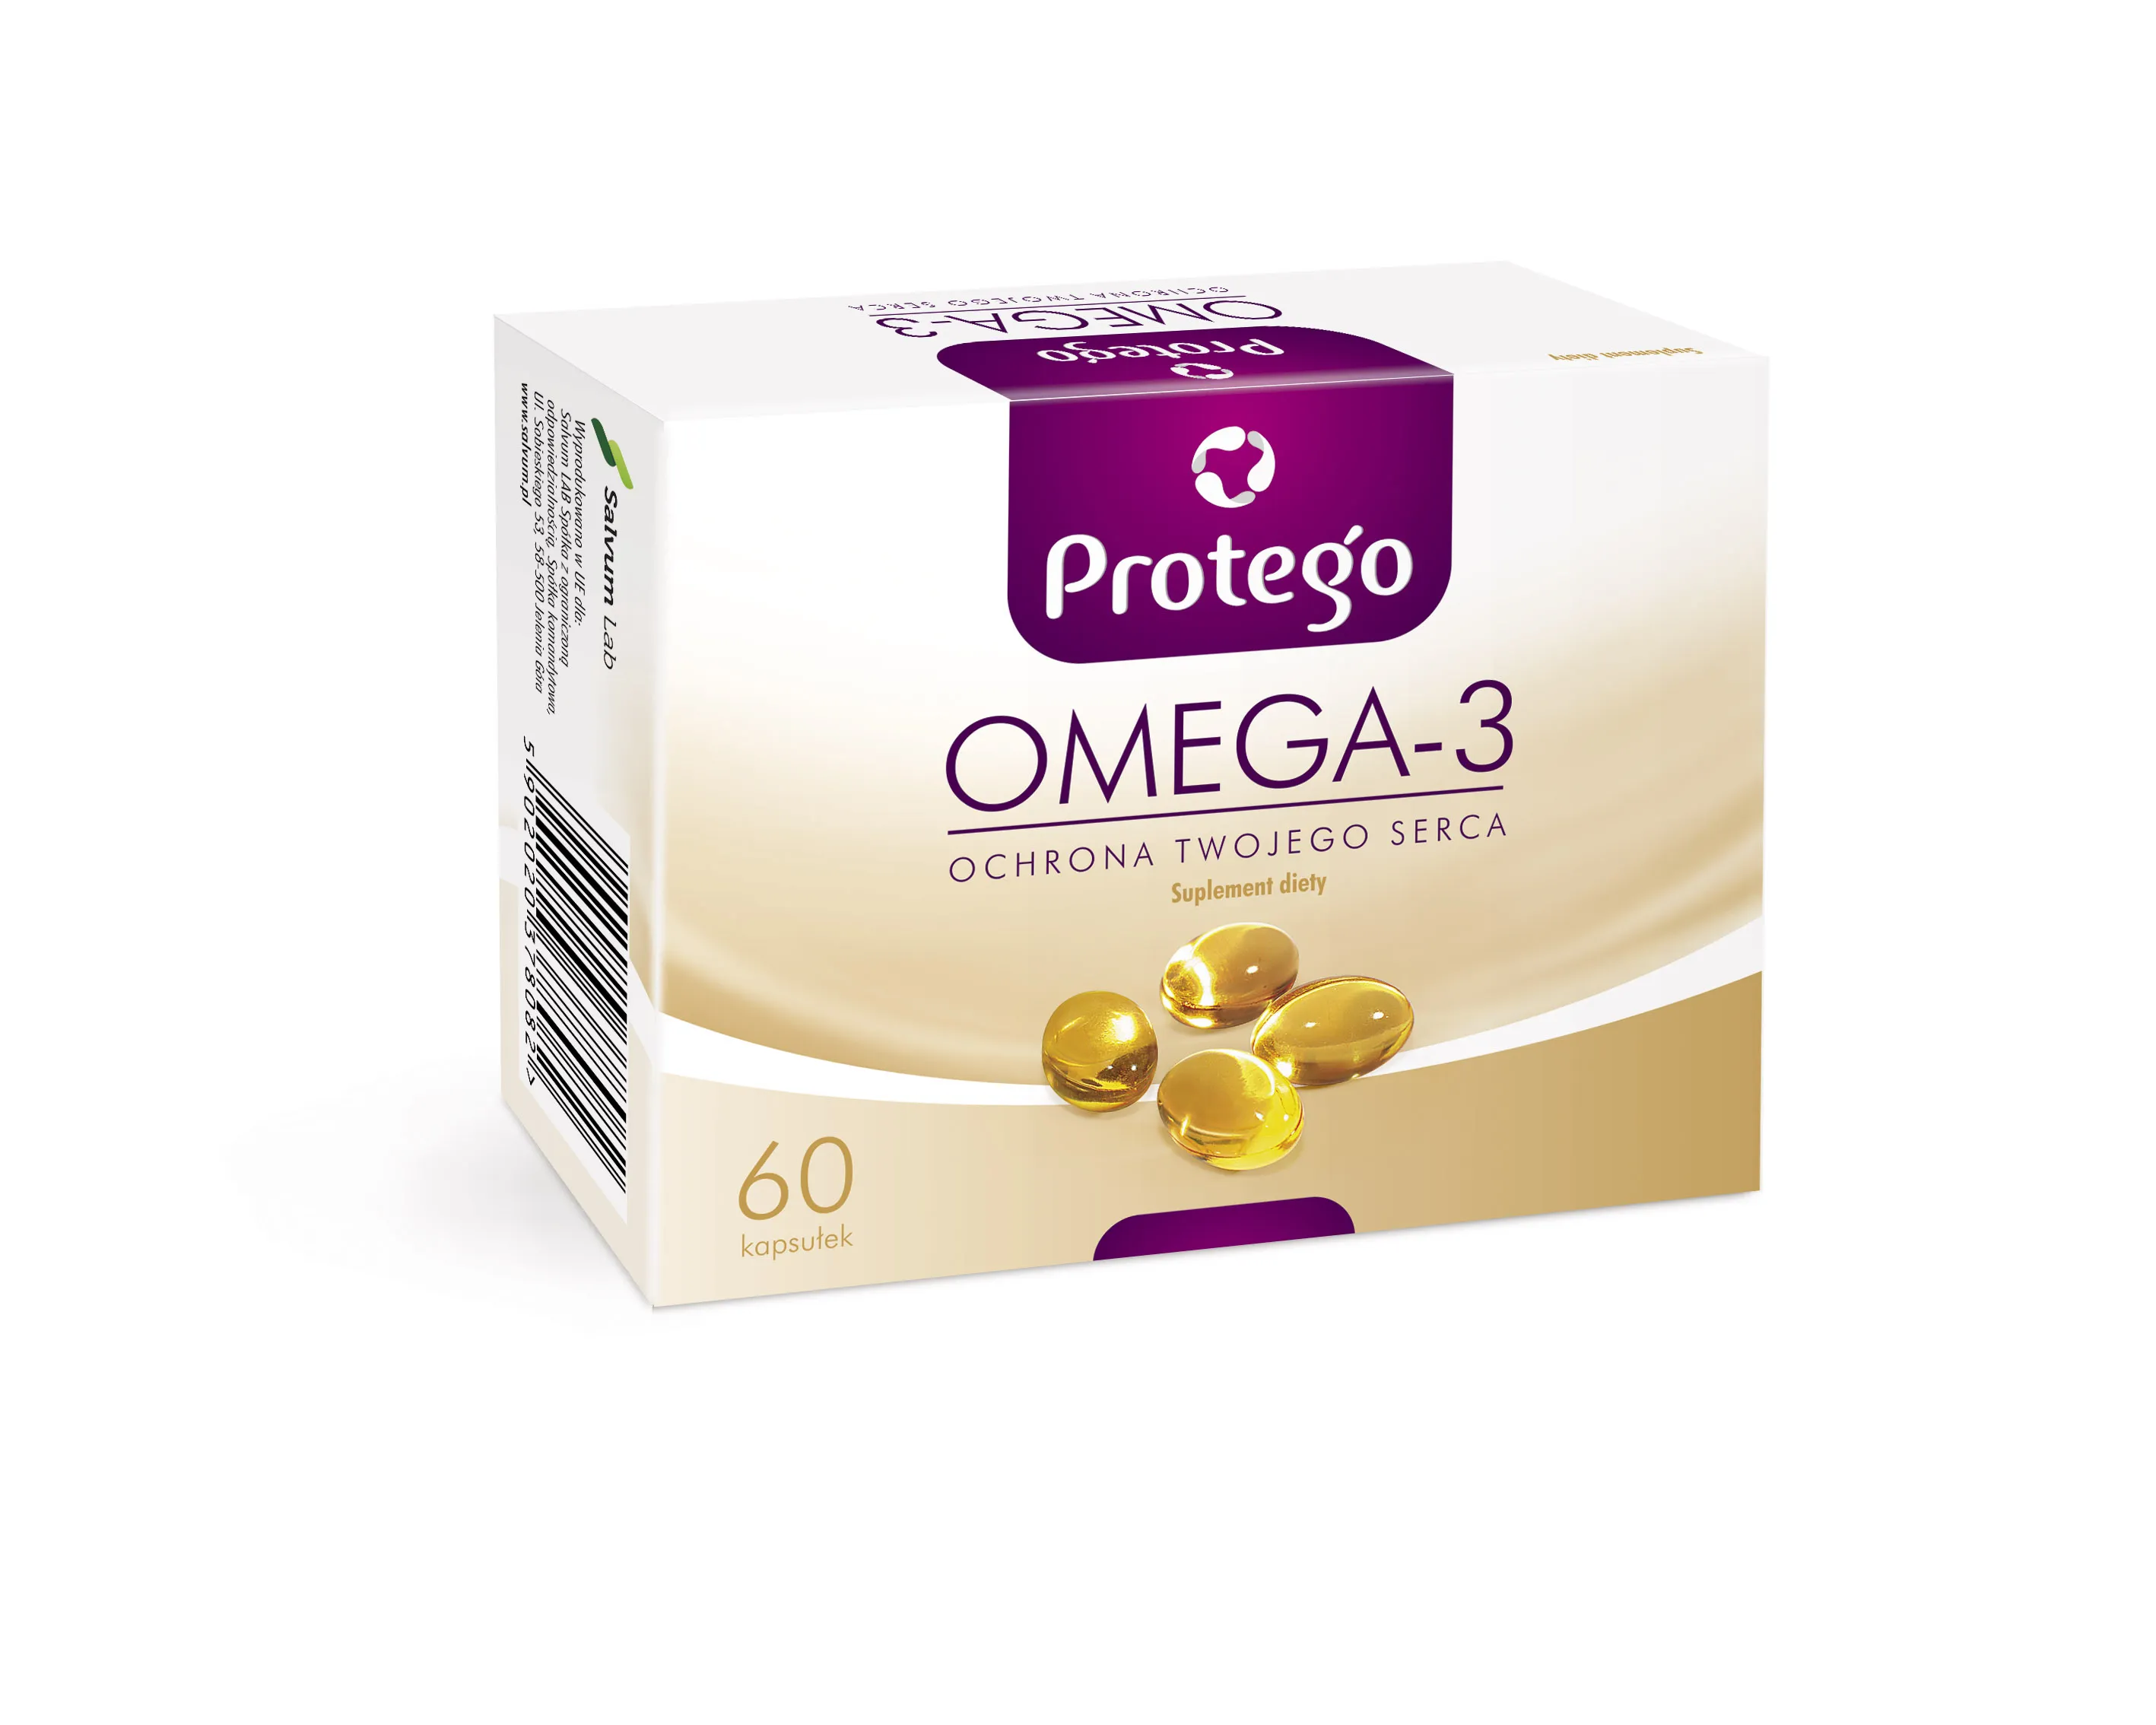 Protego Omega-3, suplement diety, 60 kapsułek